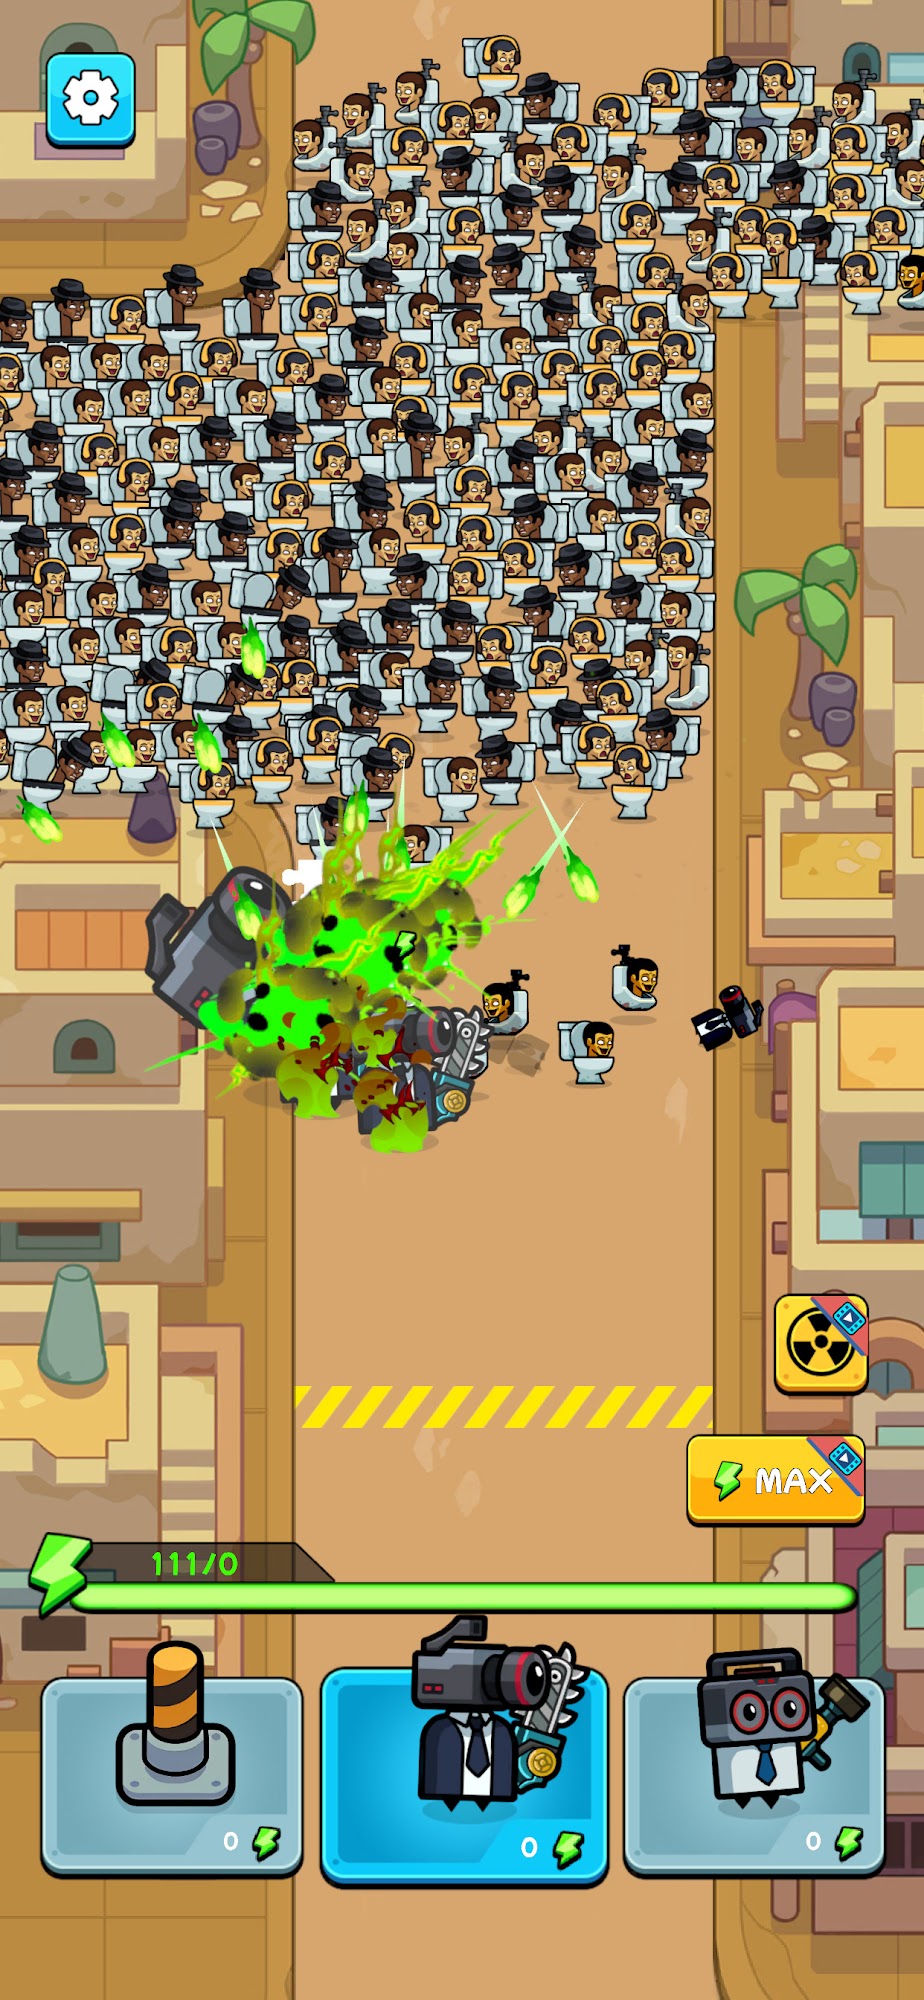 Gameplay of the Toilet Defense for Android phone or tablet.